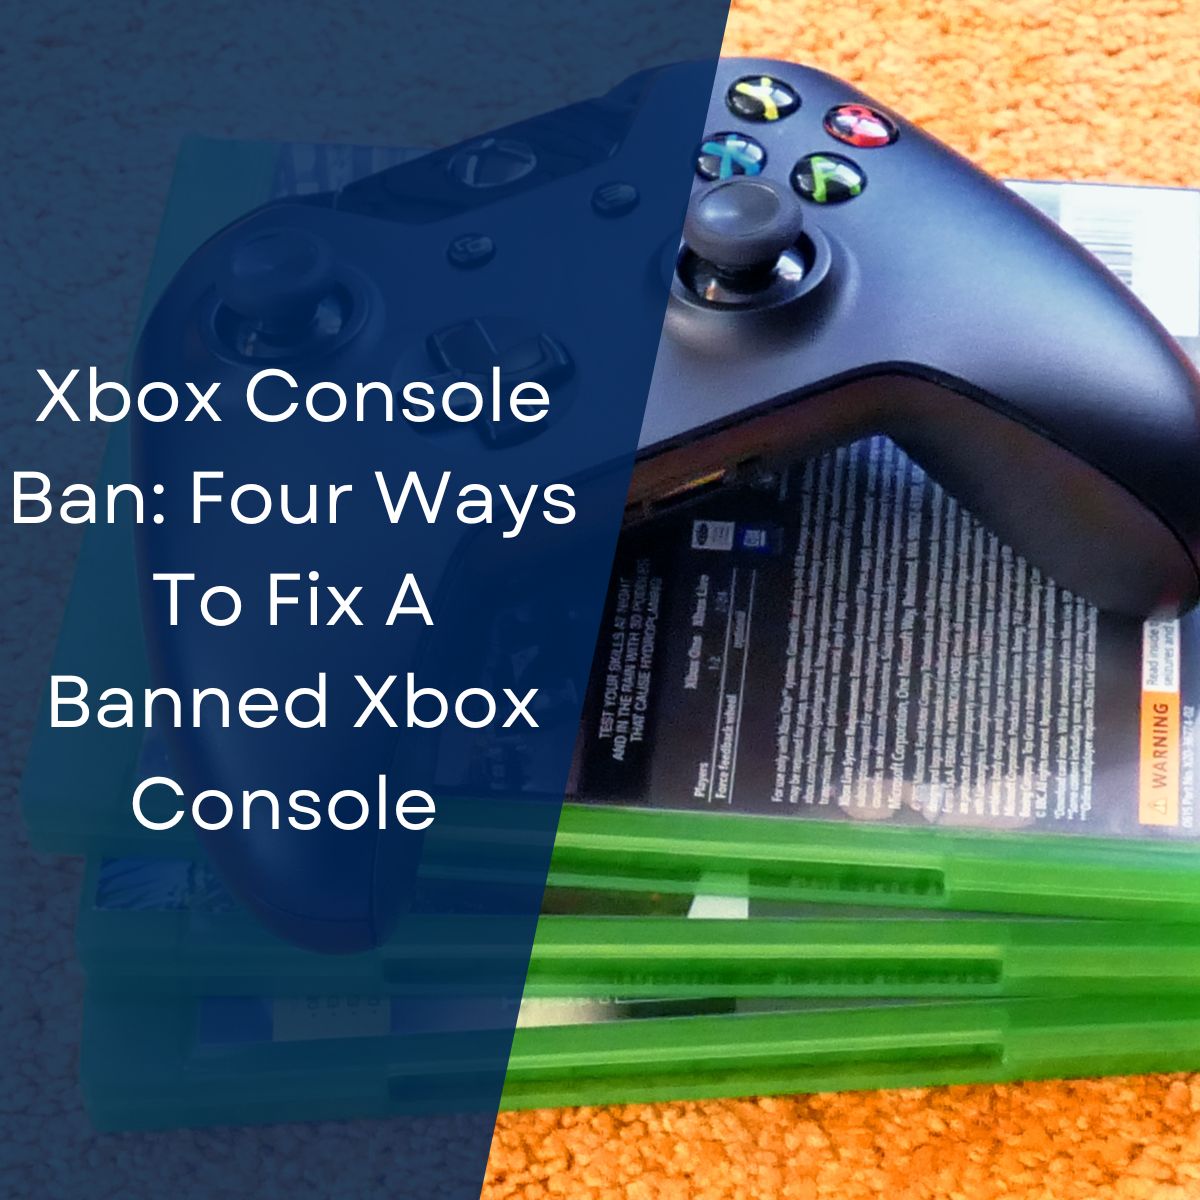 Connection Cherry Medic Xbox Console Ban: Four Ways To Fix A Banned Xbox Console - Retro Only